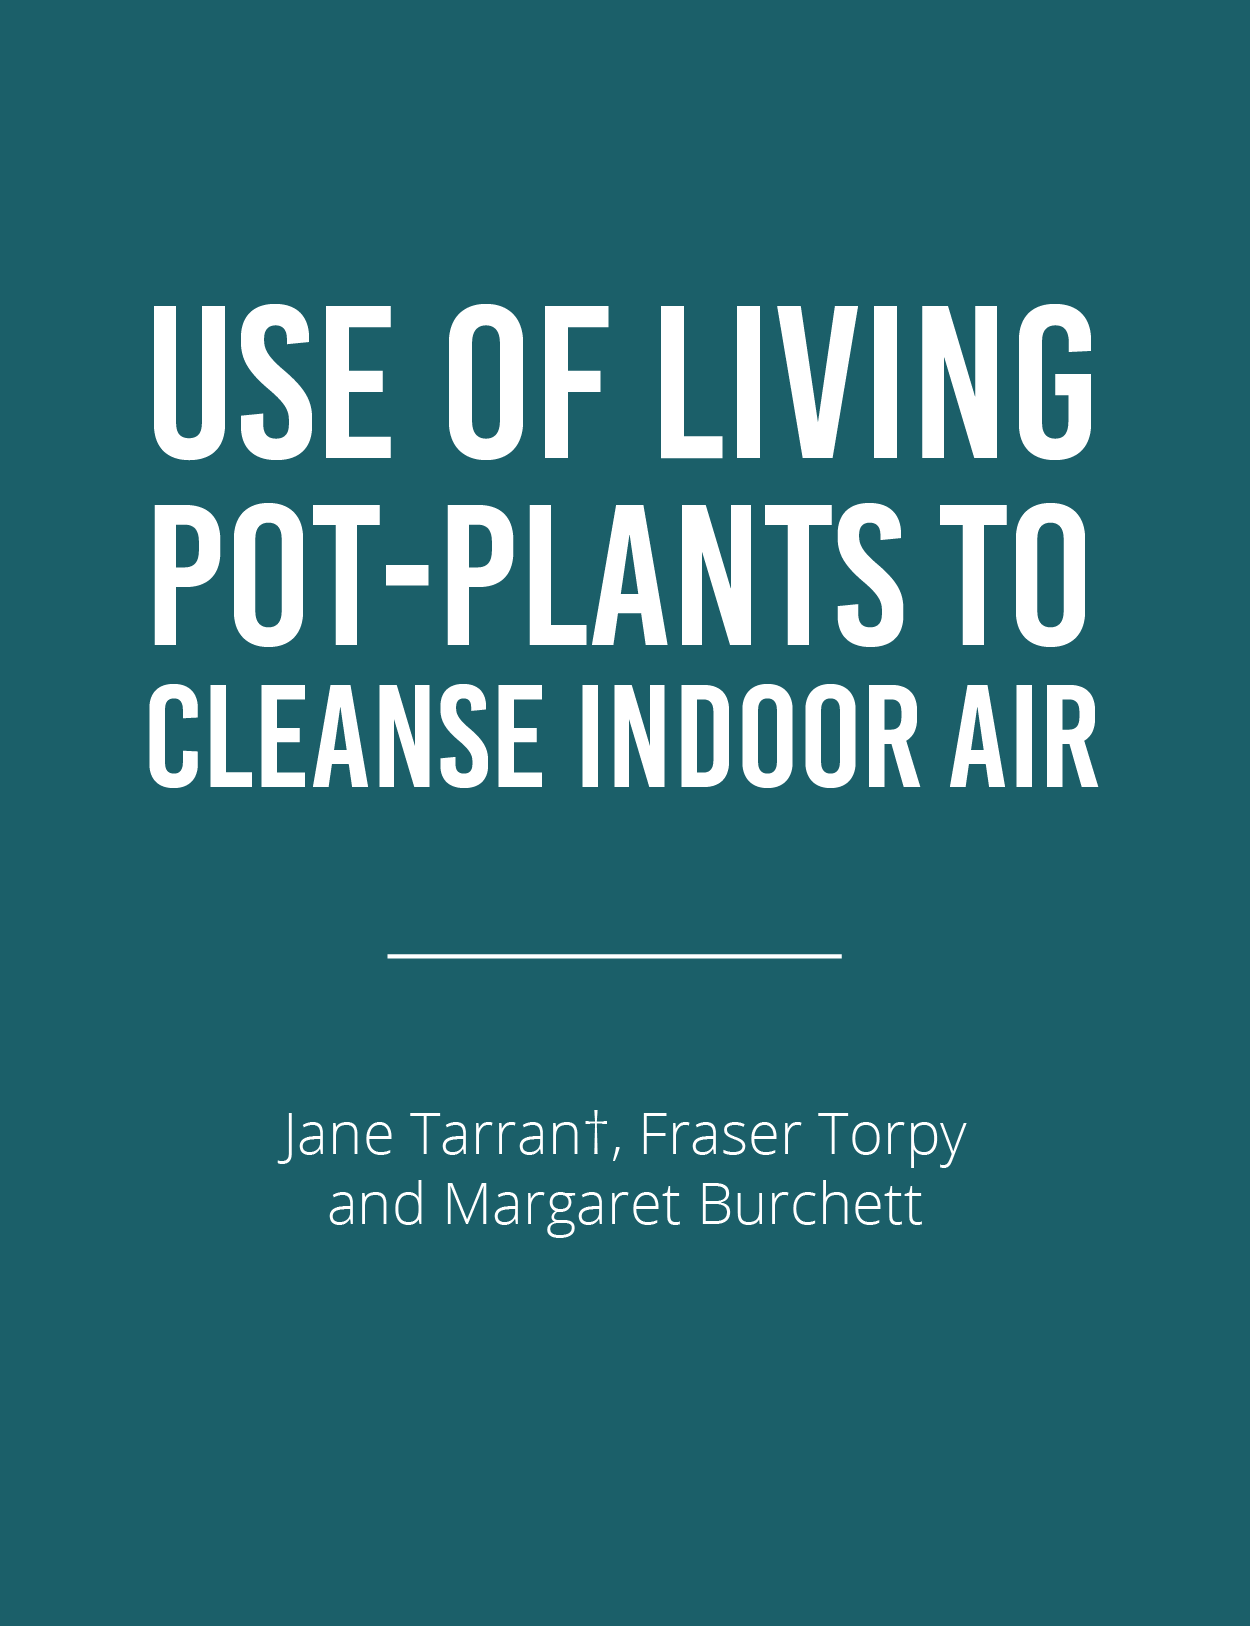 plants cleanse indoor air